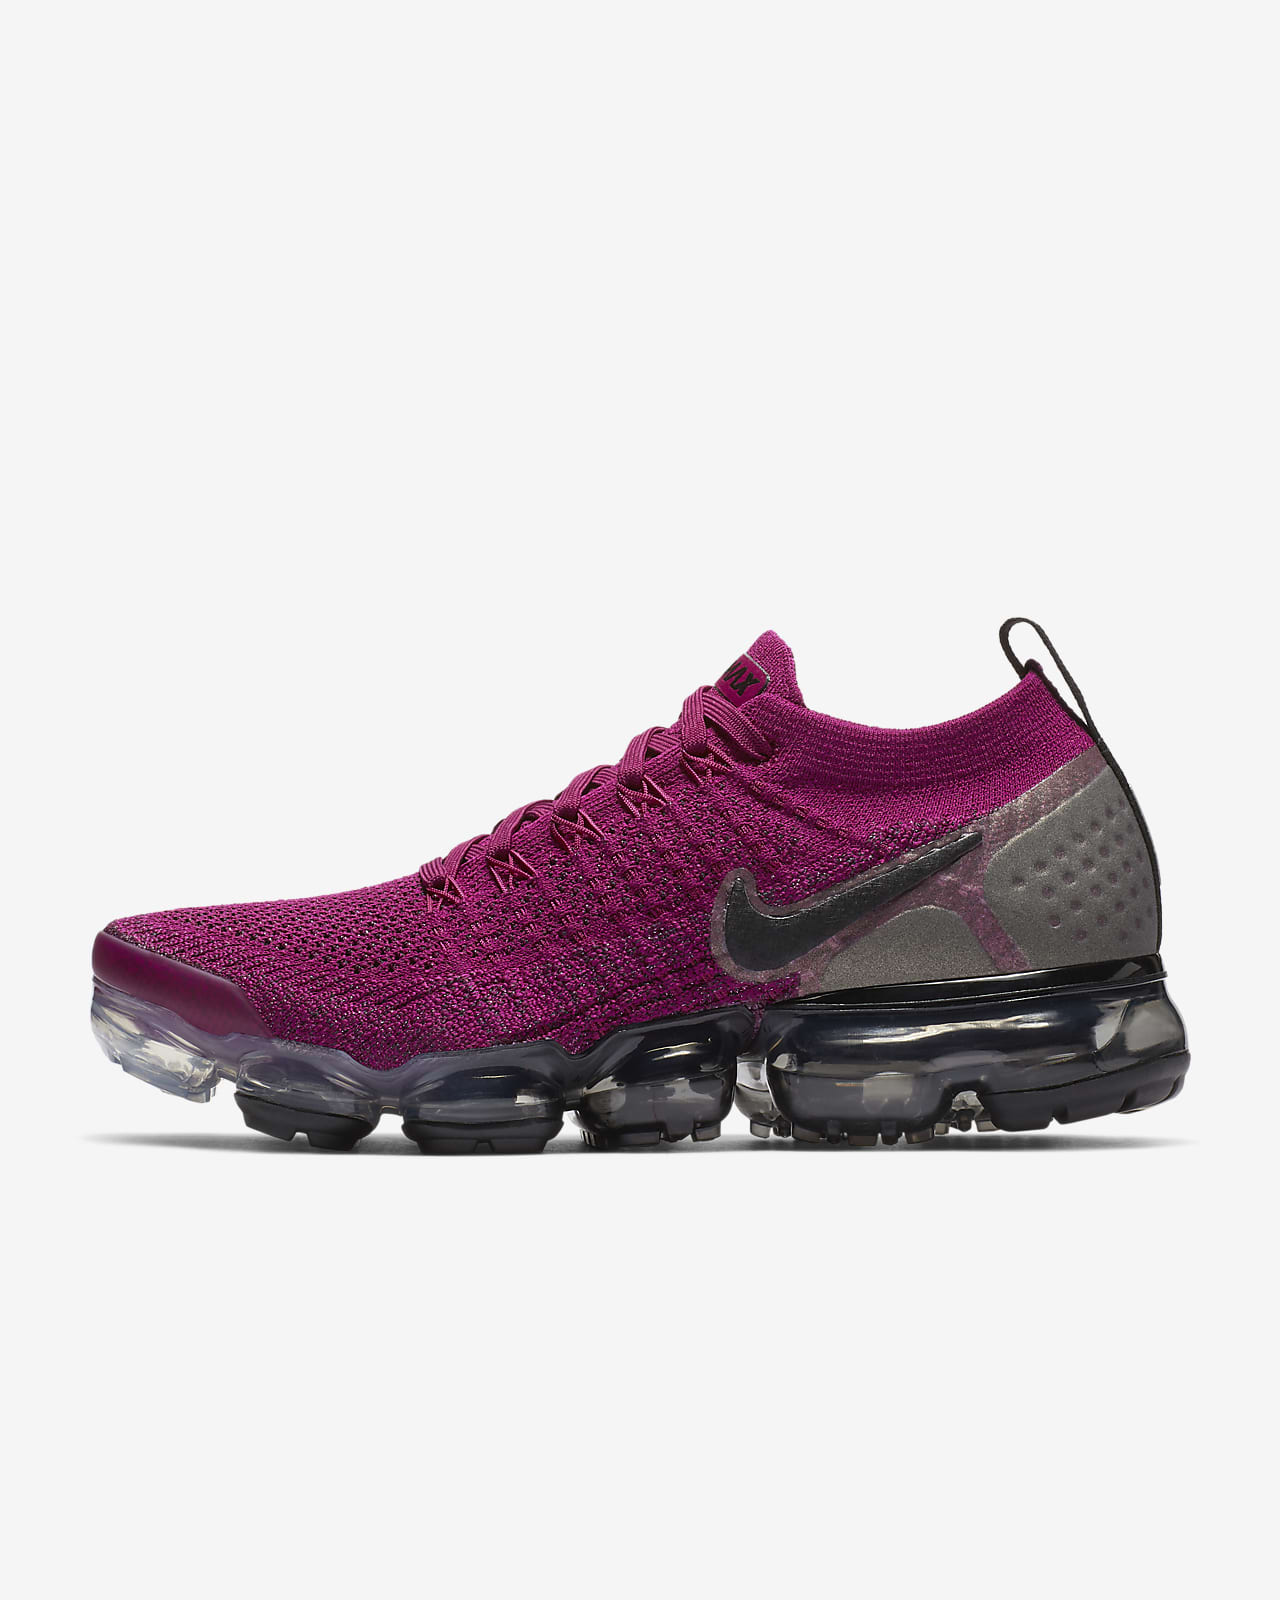 vapormax womens black and pink